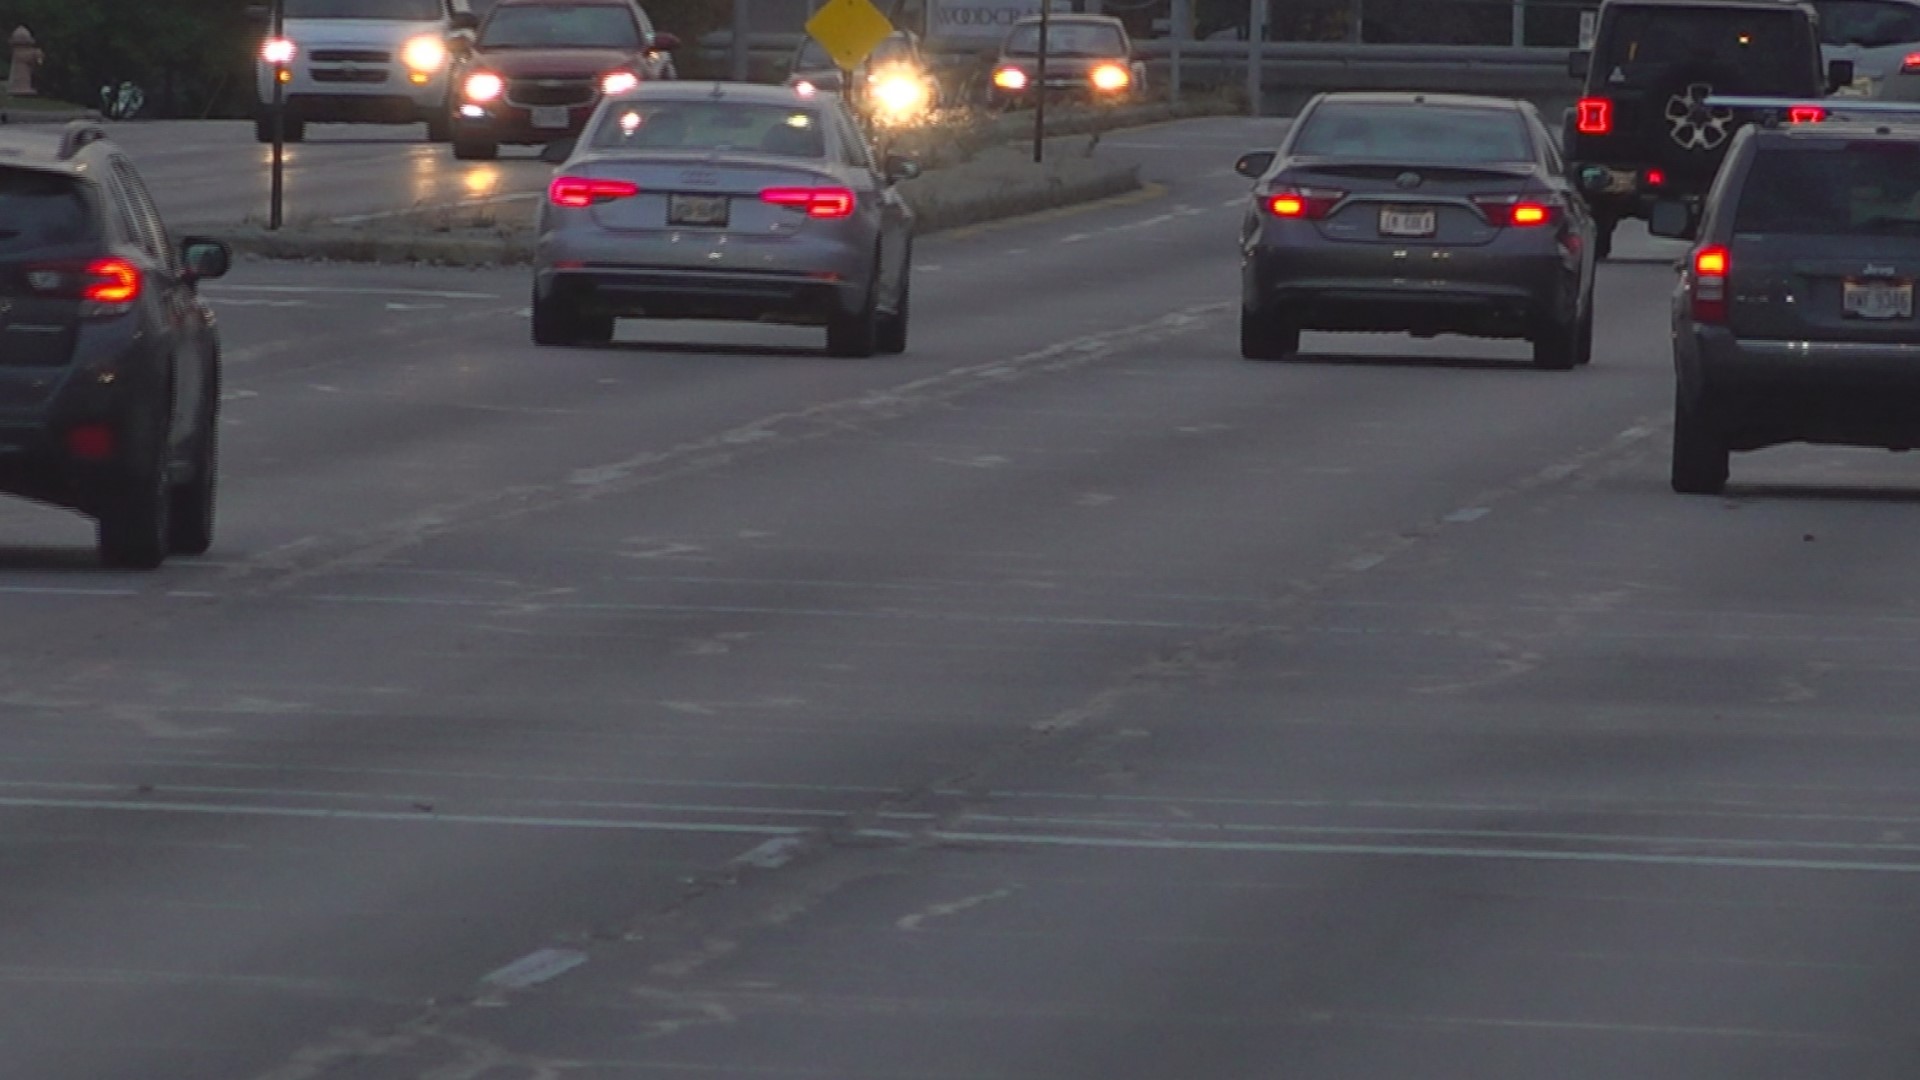 “It’s comparable to driving drunk.” AAA warns of paying extra attention on the road with the change of times.